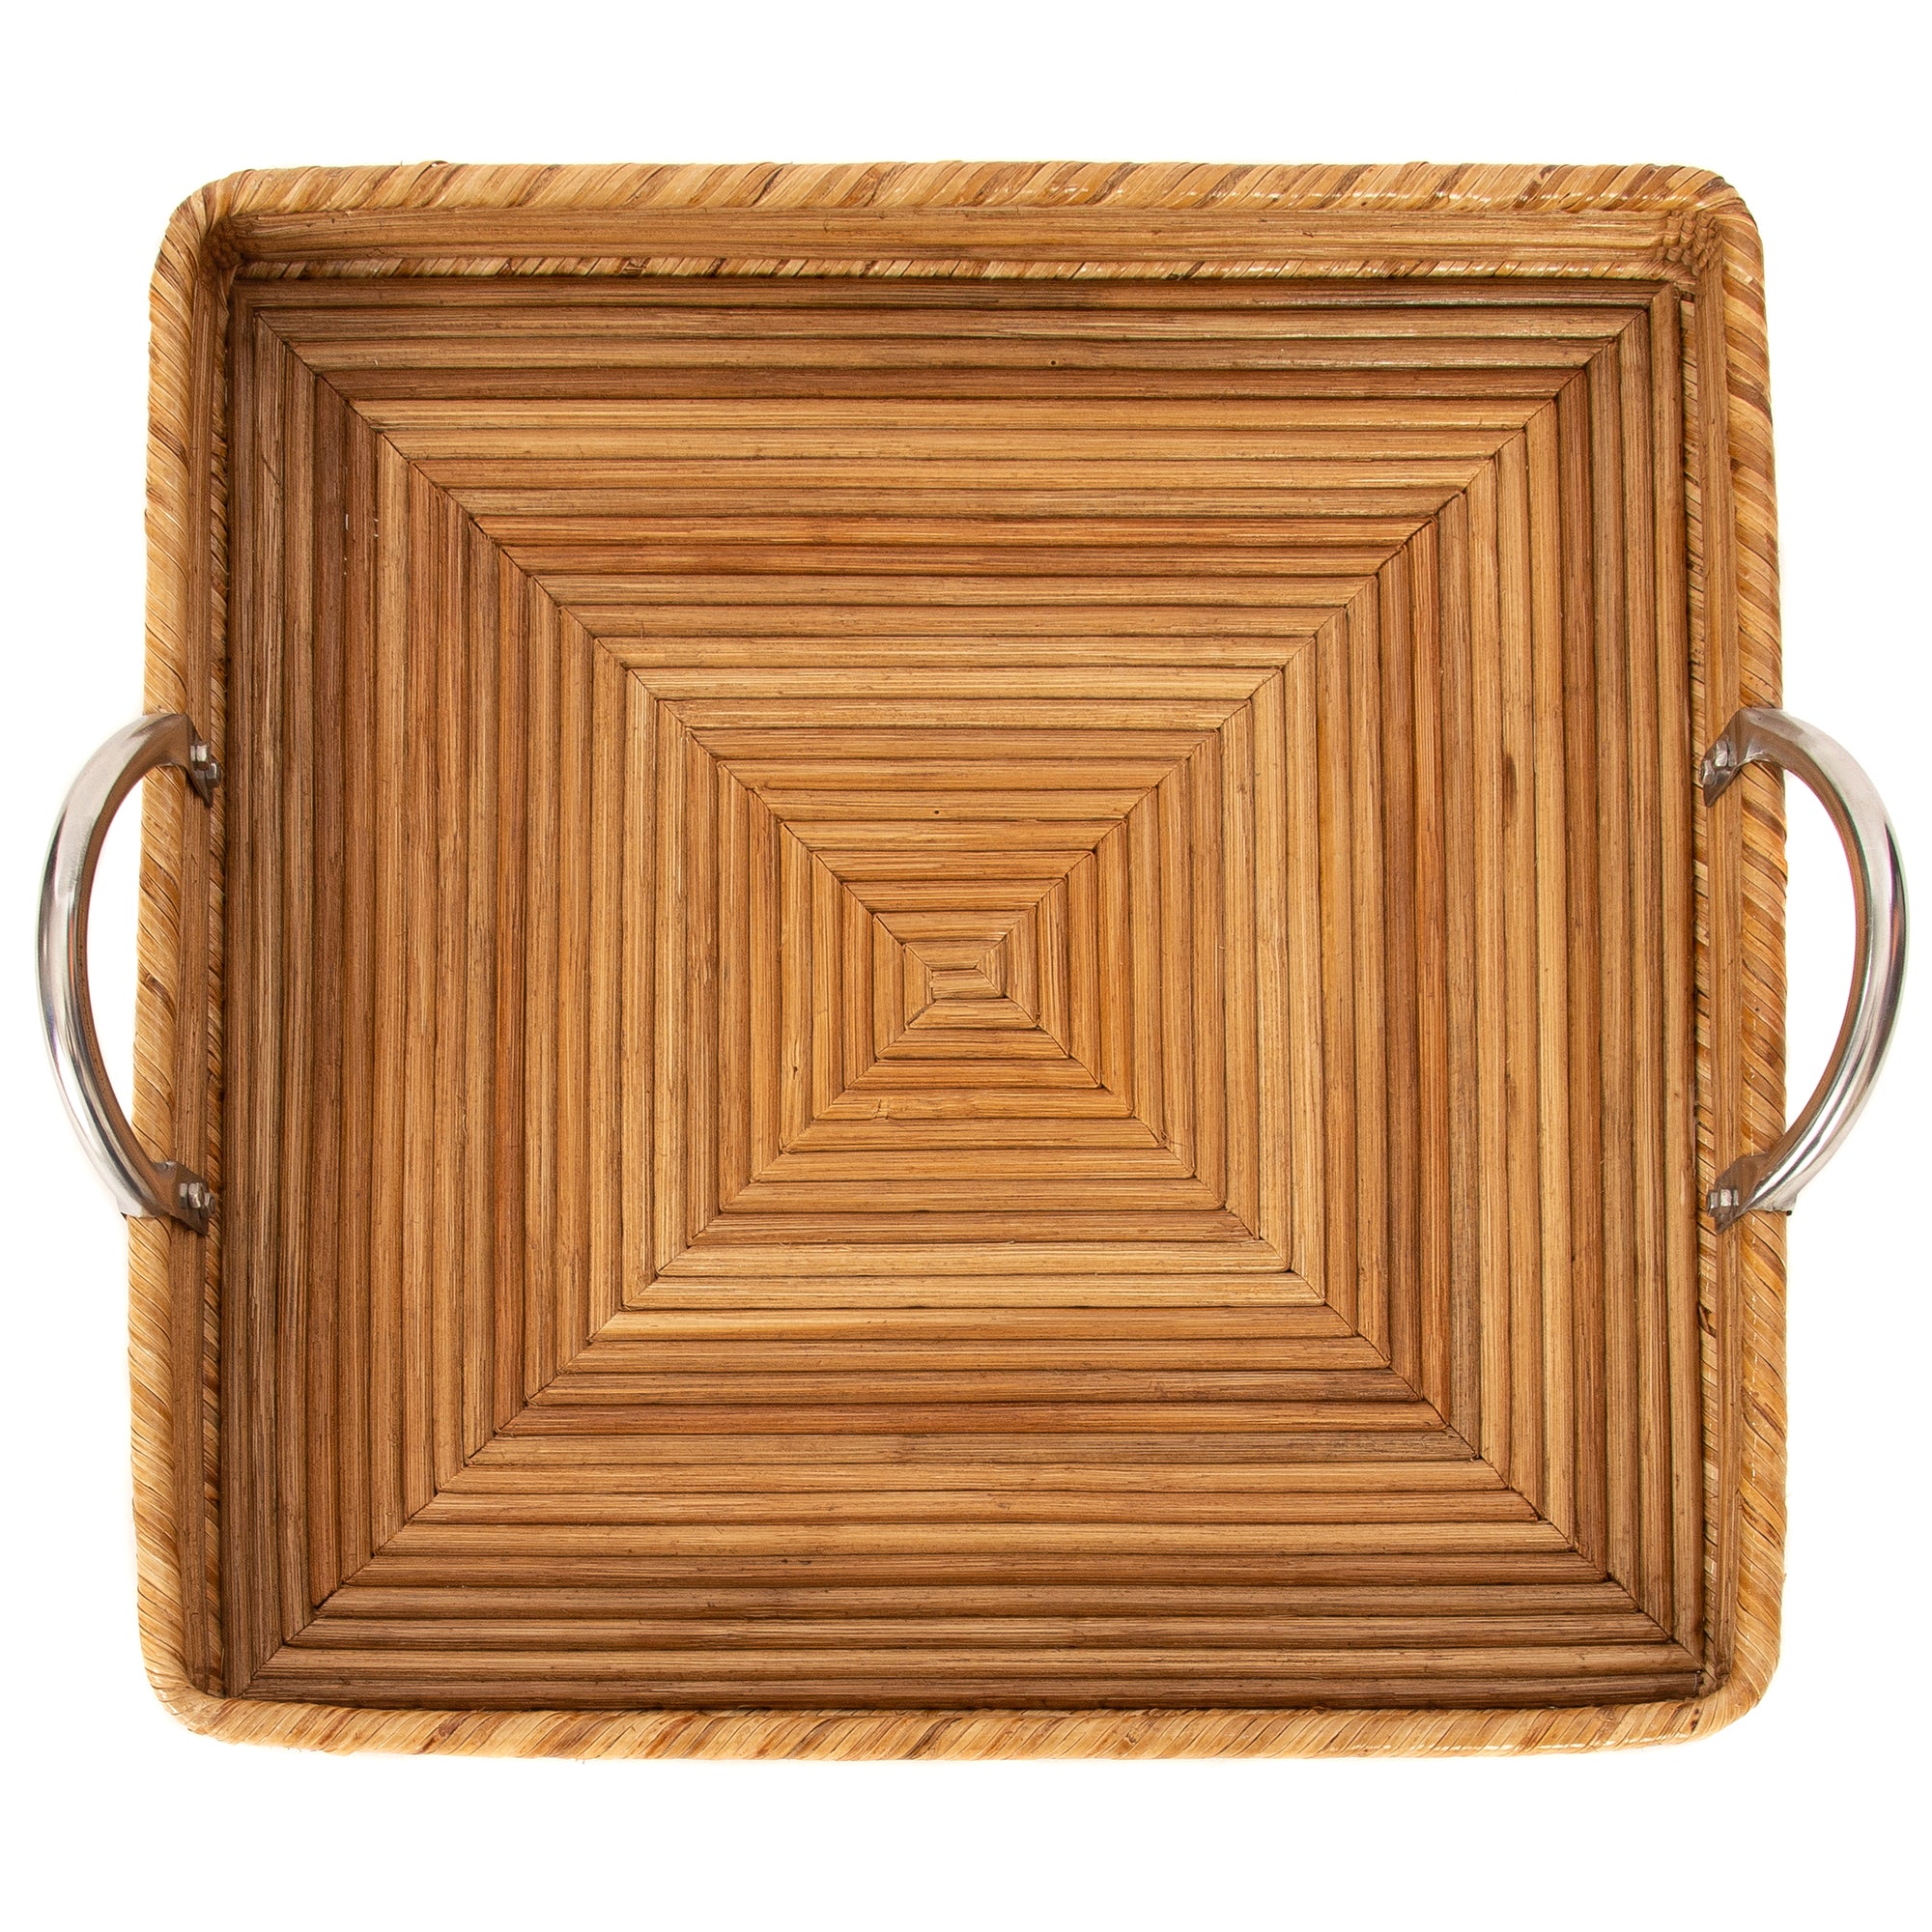 Square Tray with Stainless Steel Handles